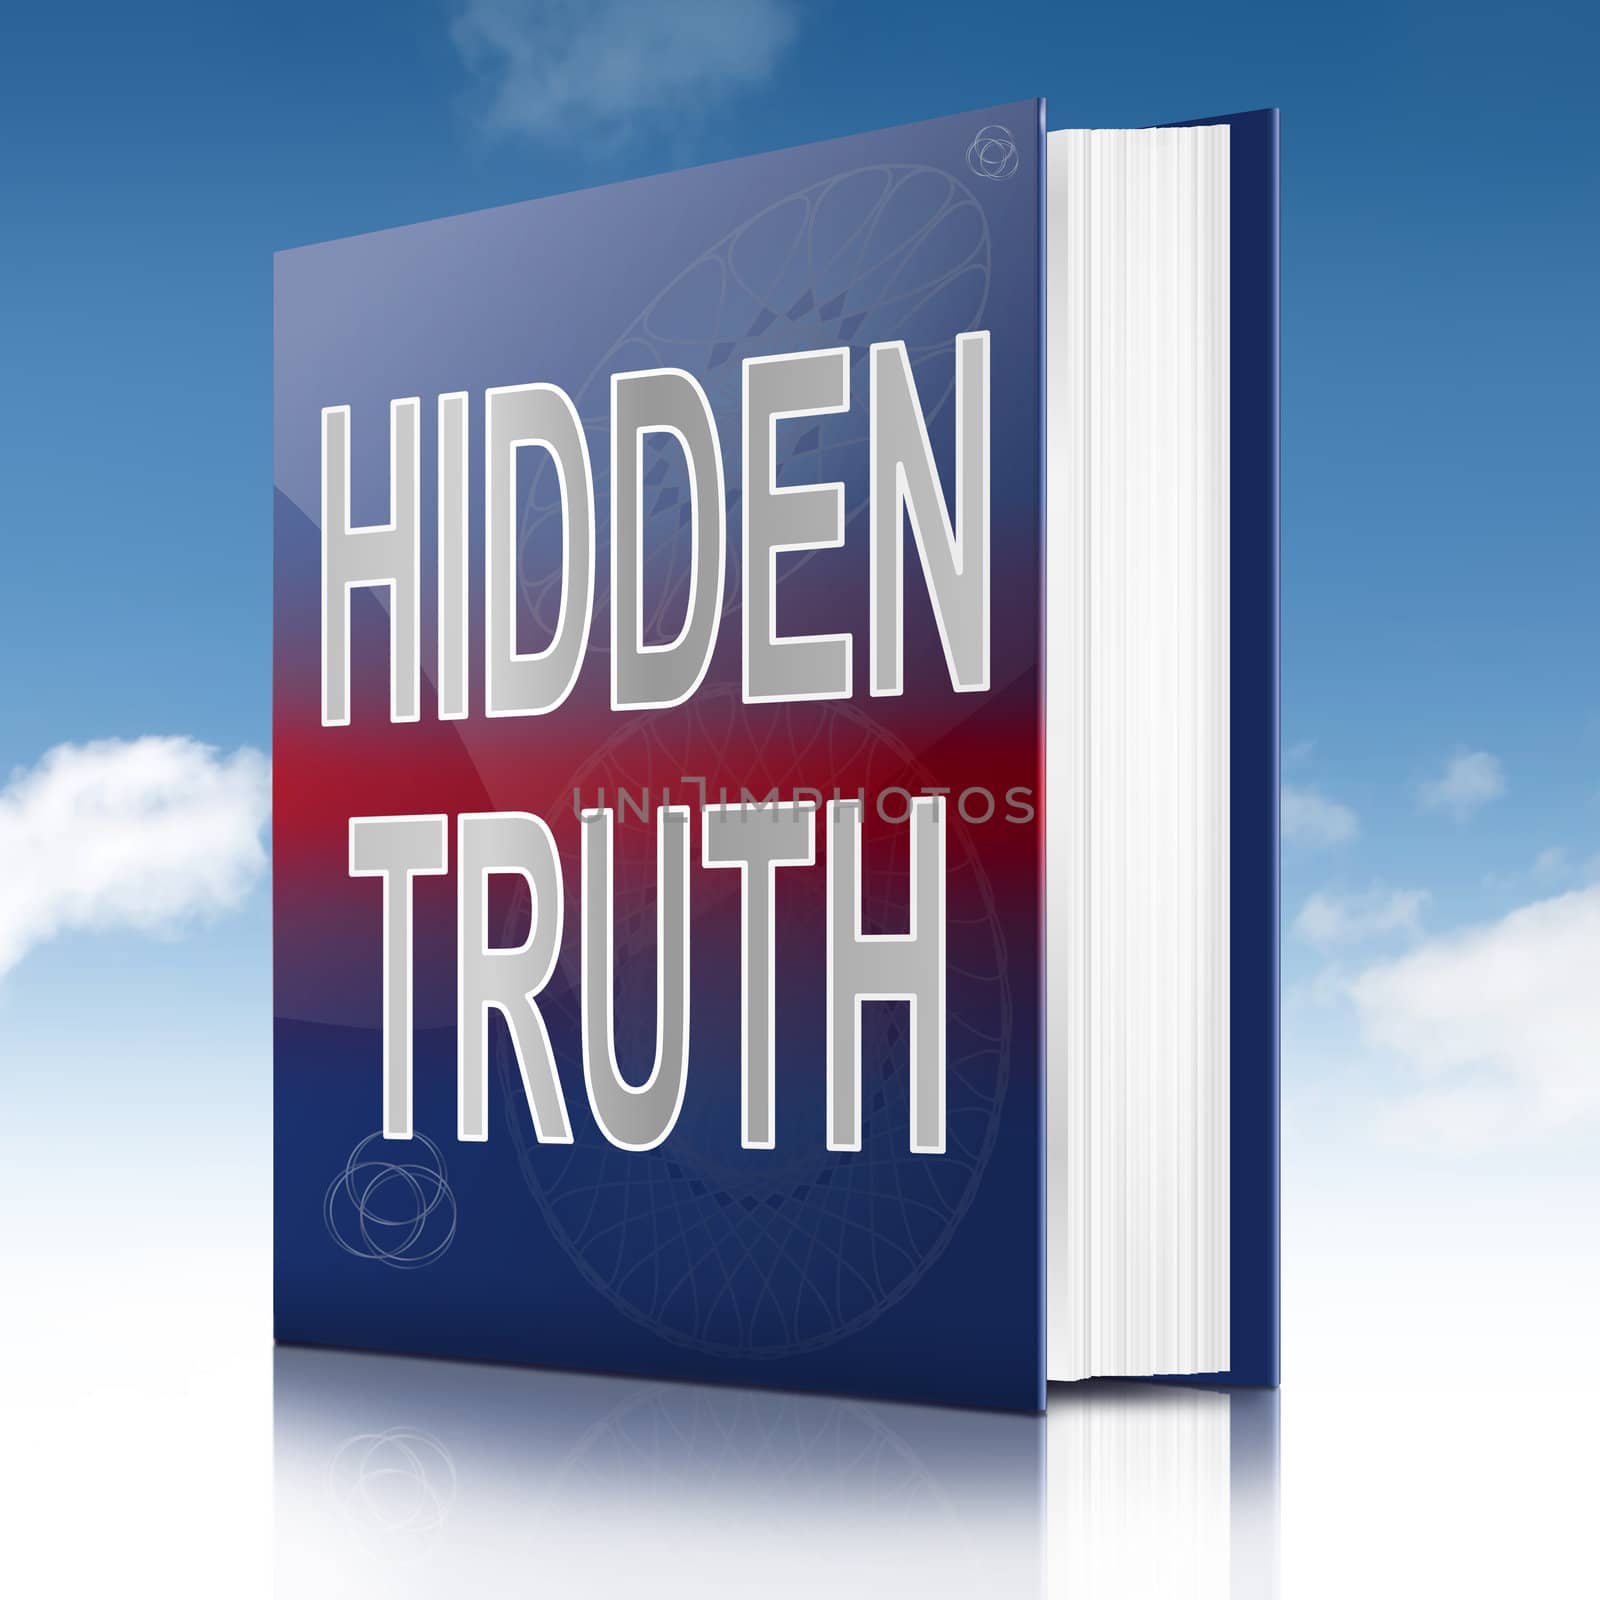 Illustration depicting a book with a hidden truth concept title. Sky background.